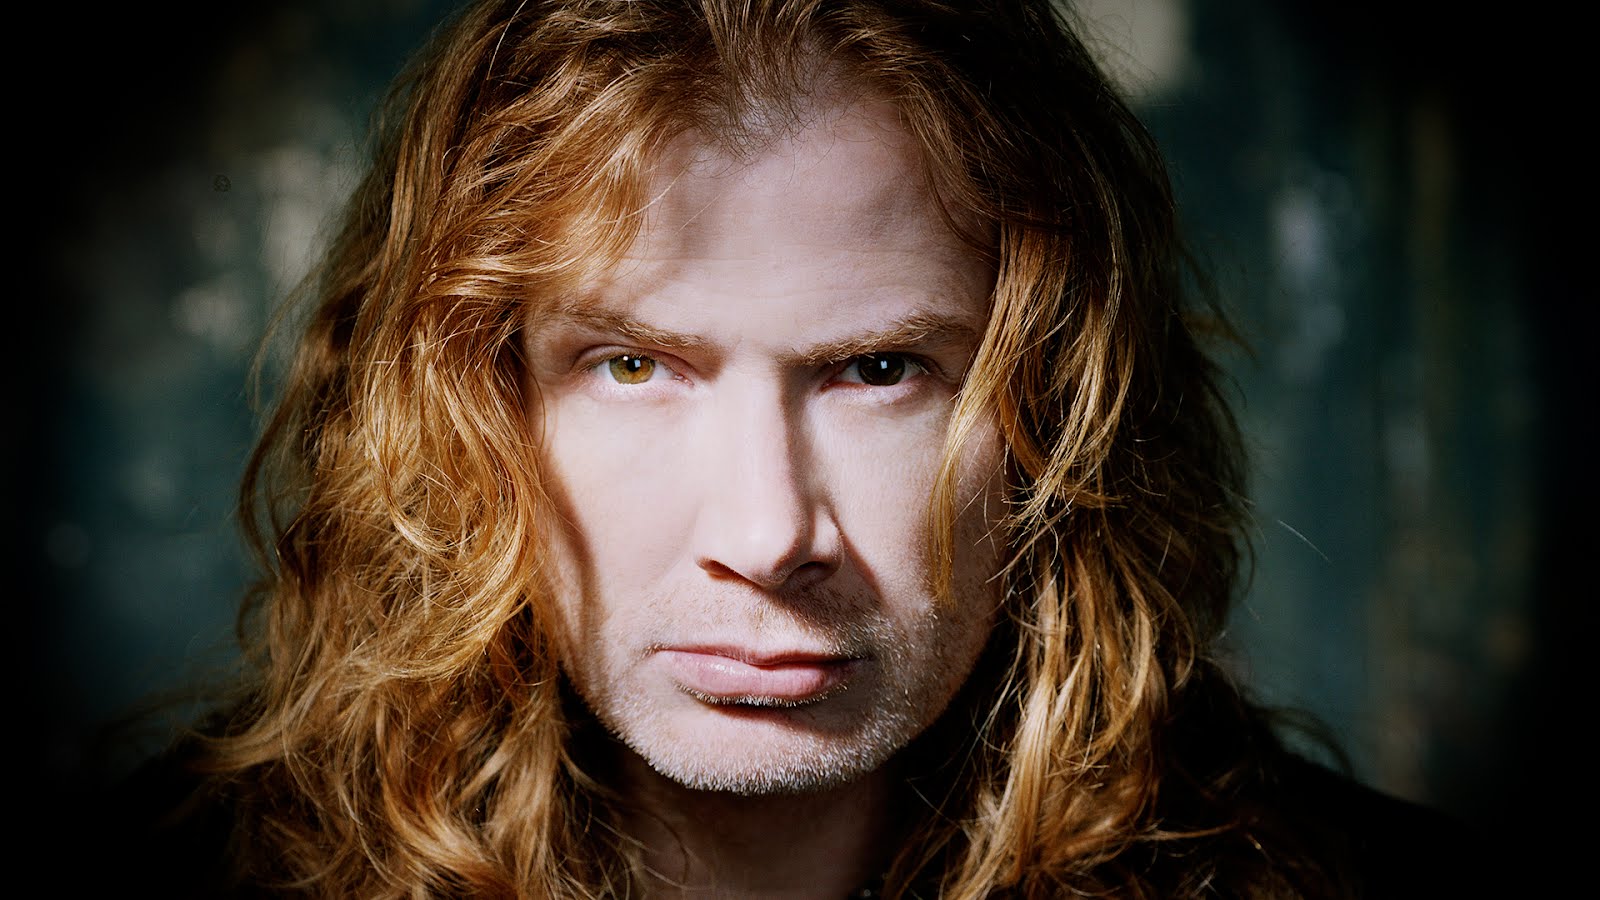 Dave Mustaine Pics, Music Collection